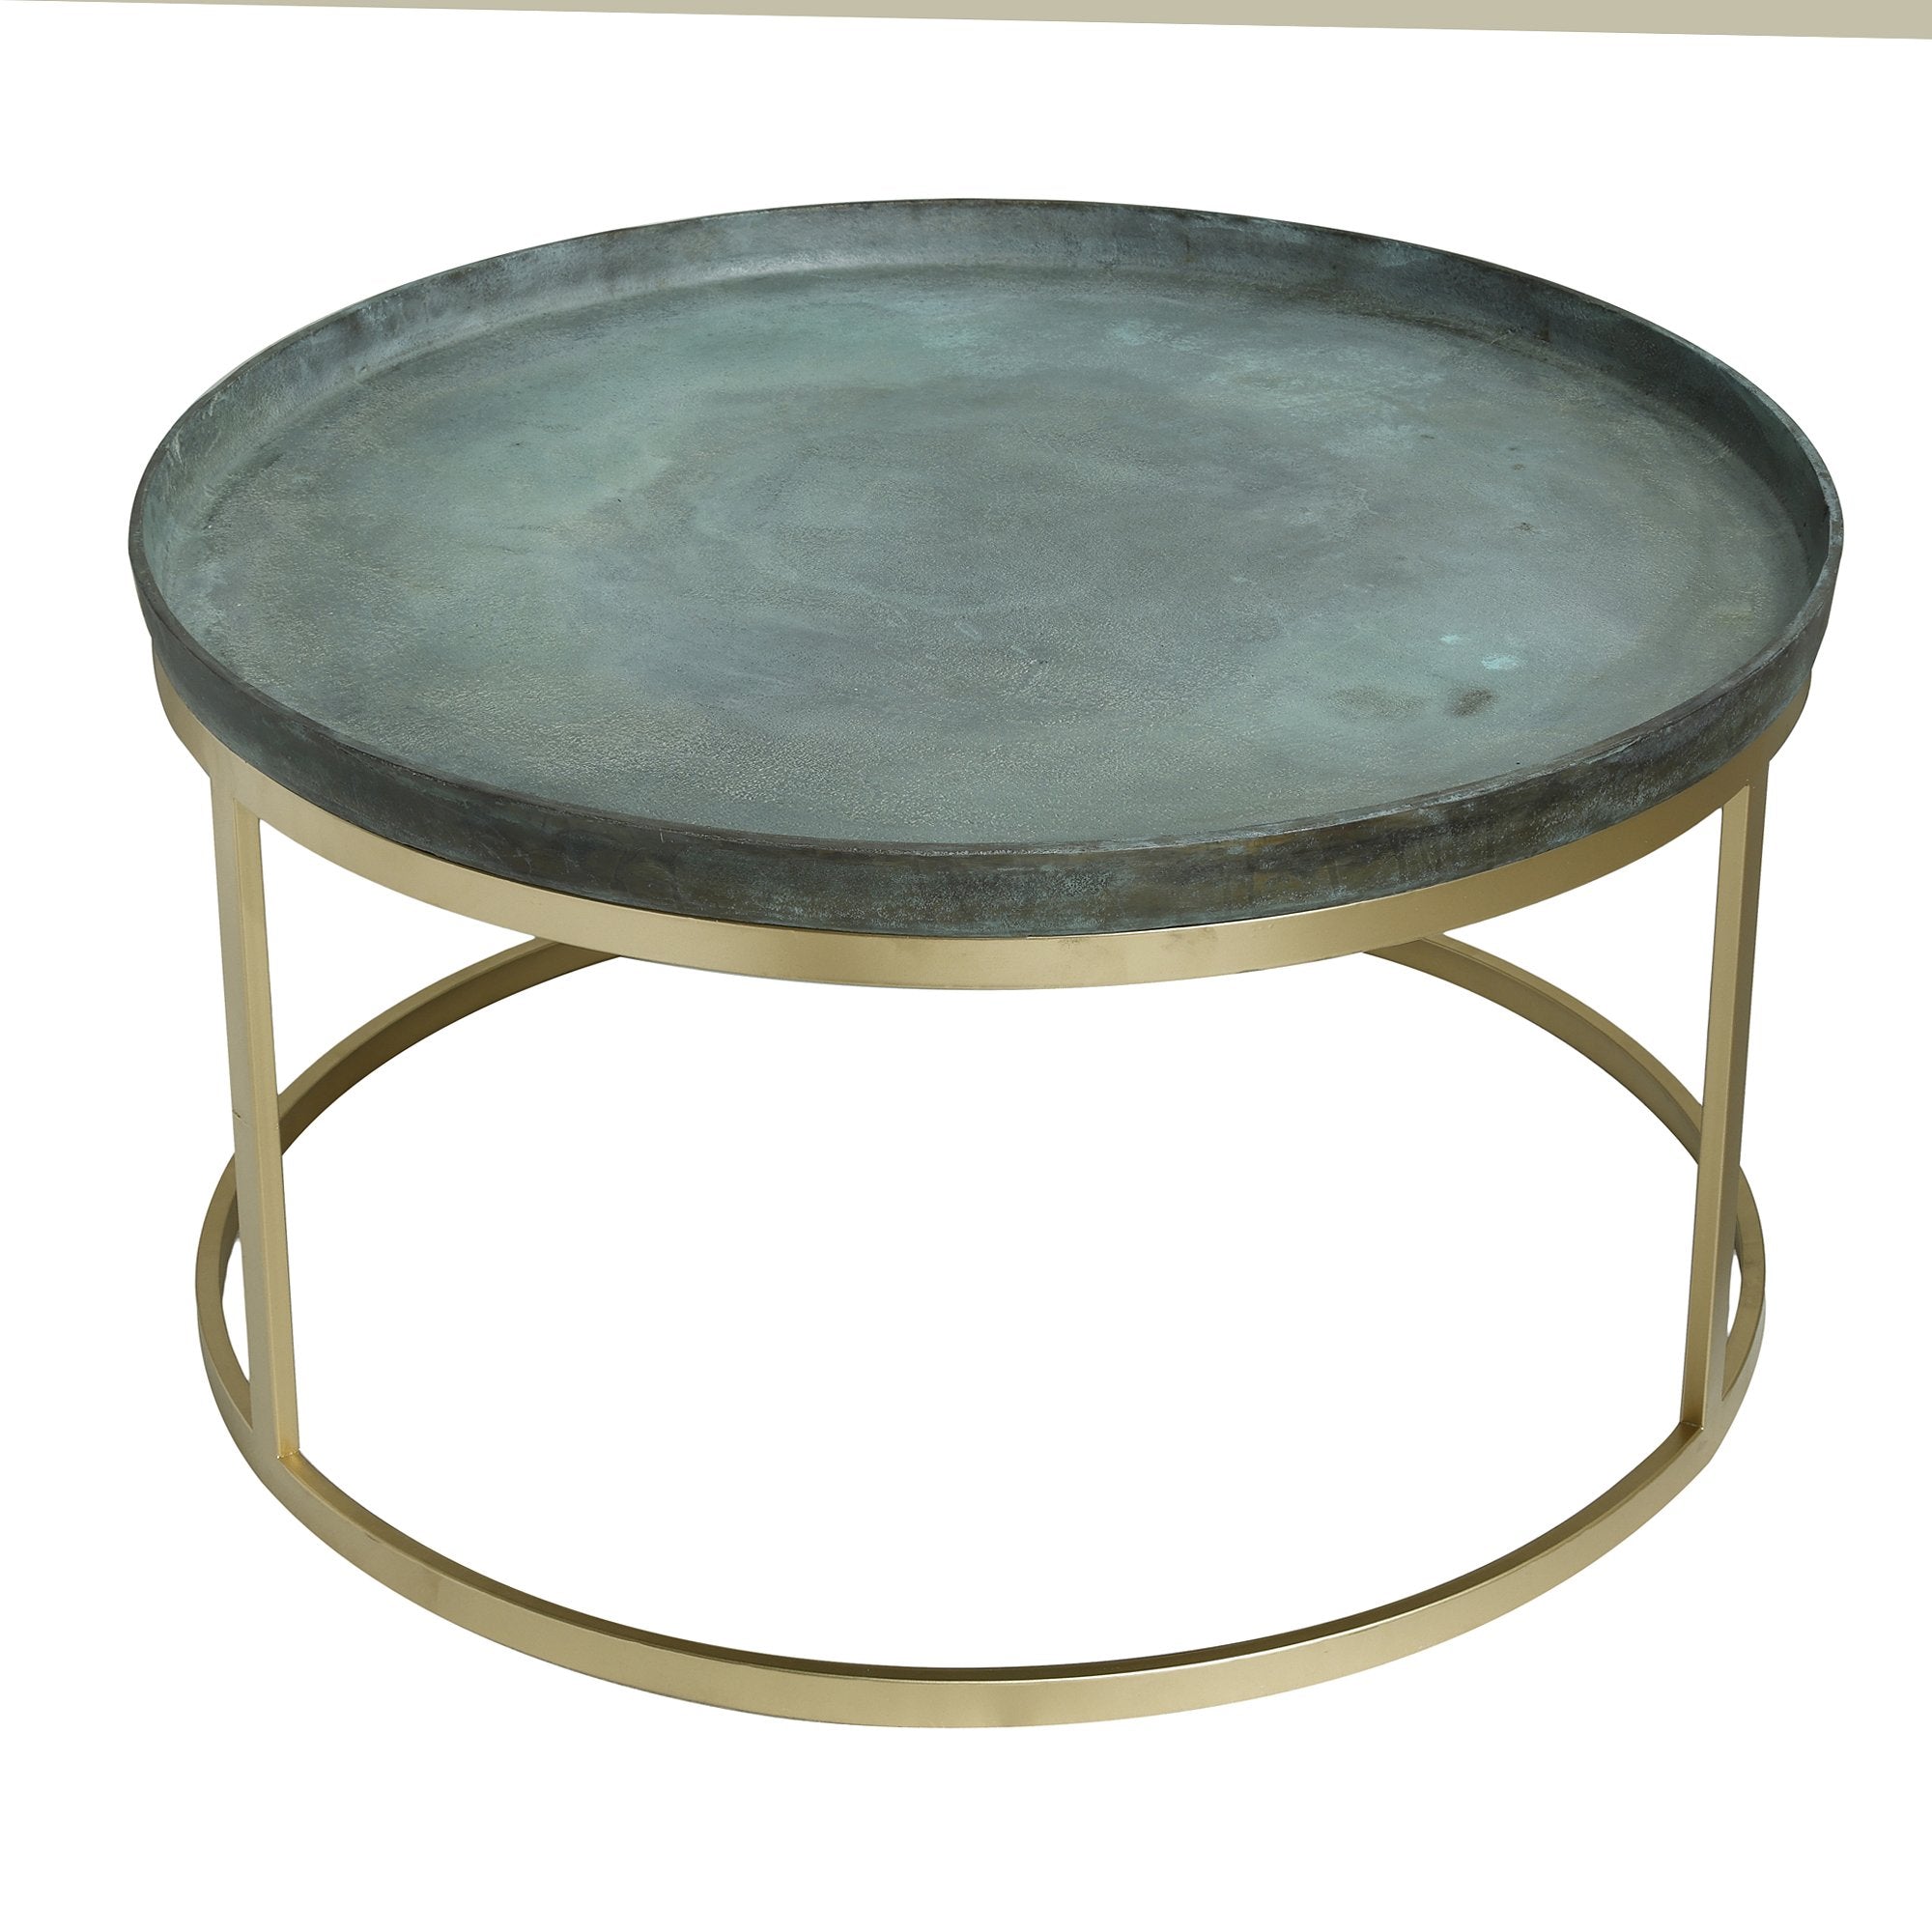 PTMD Fenn Green alu coffee table iron stand round SV3